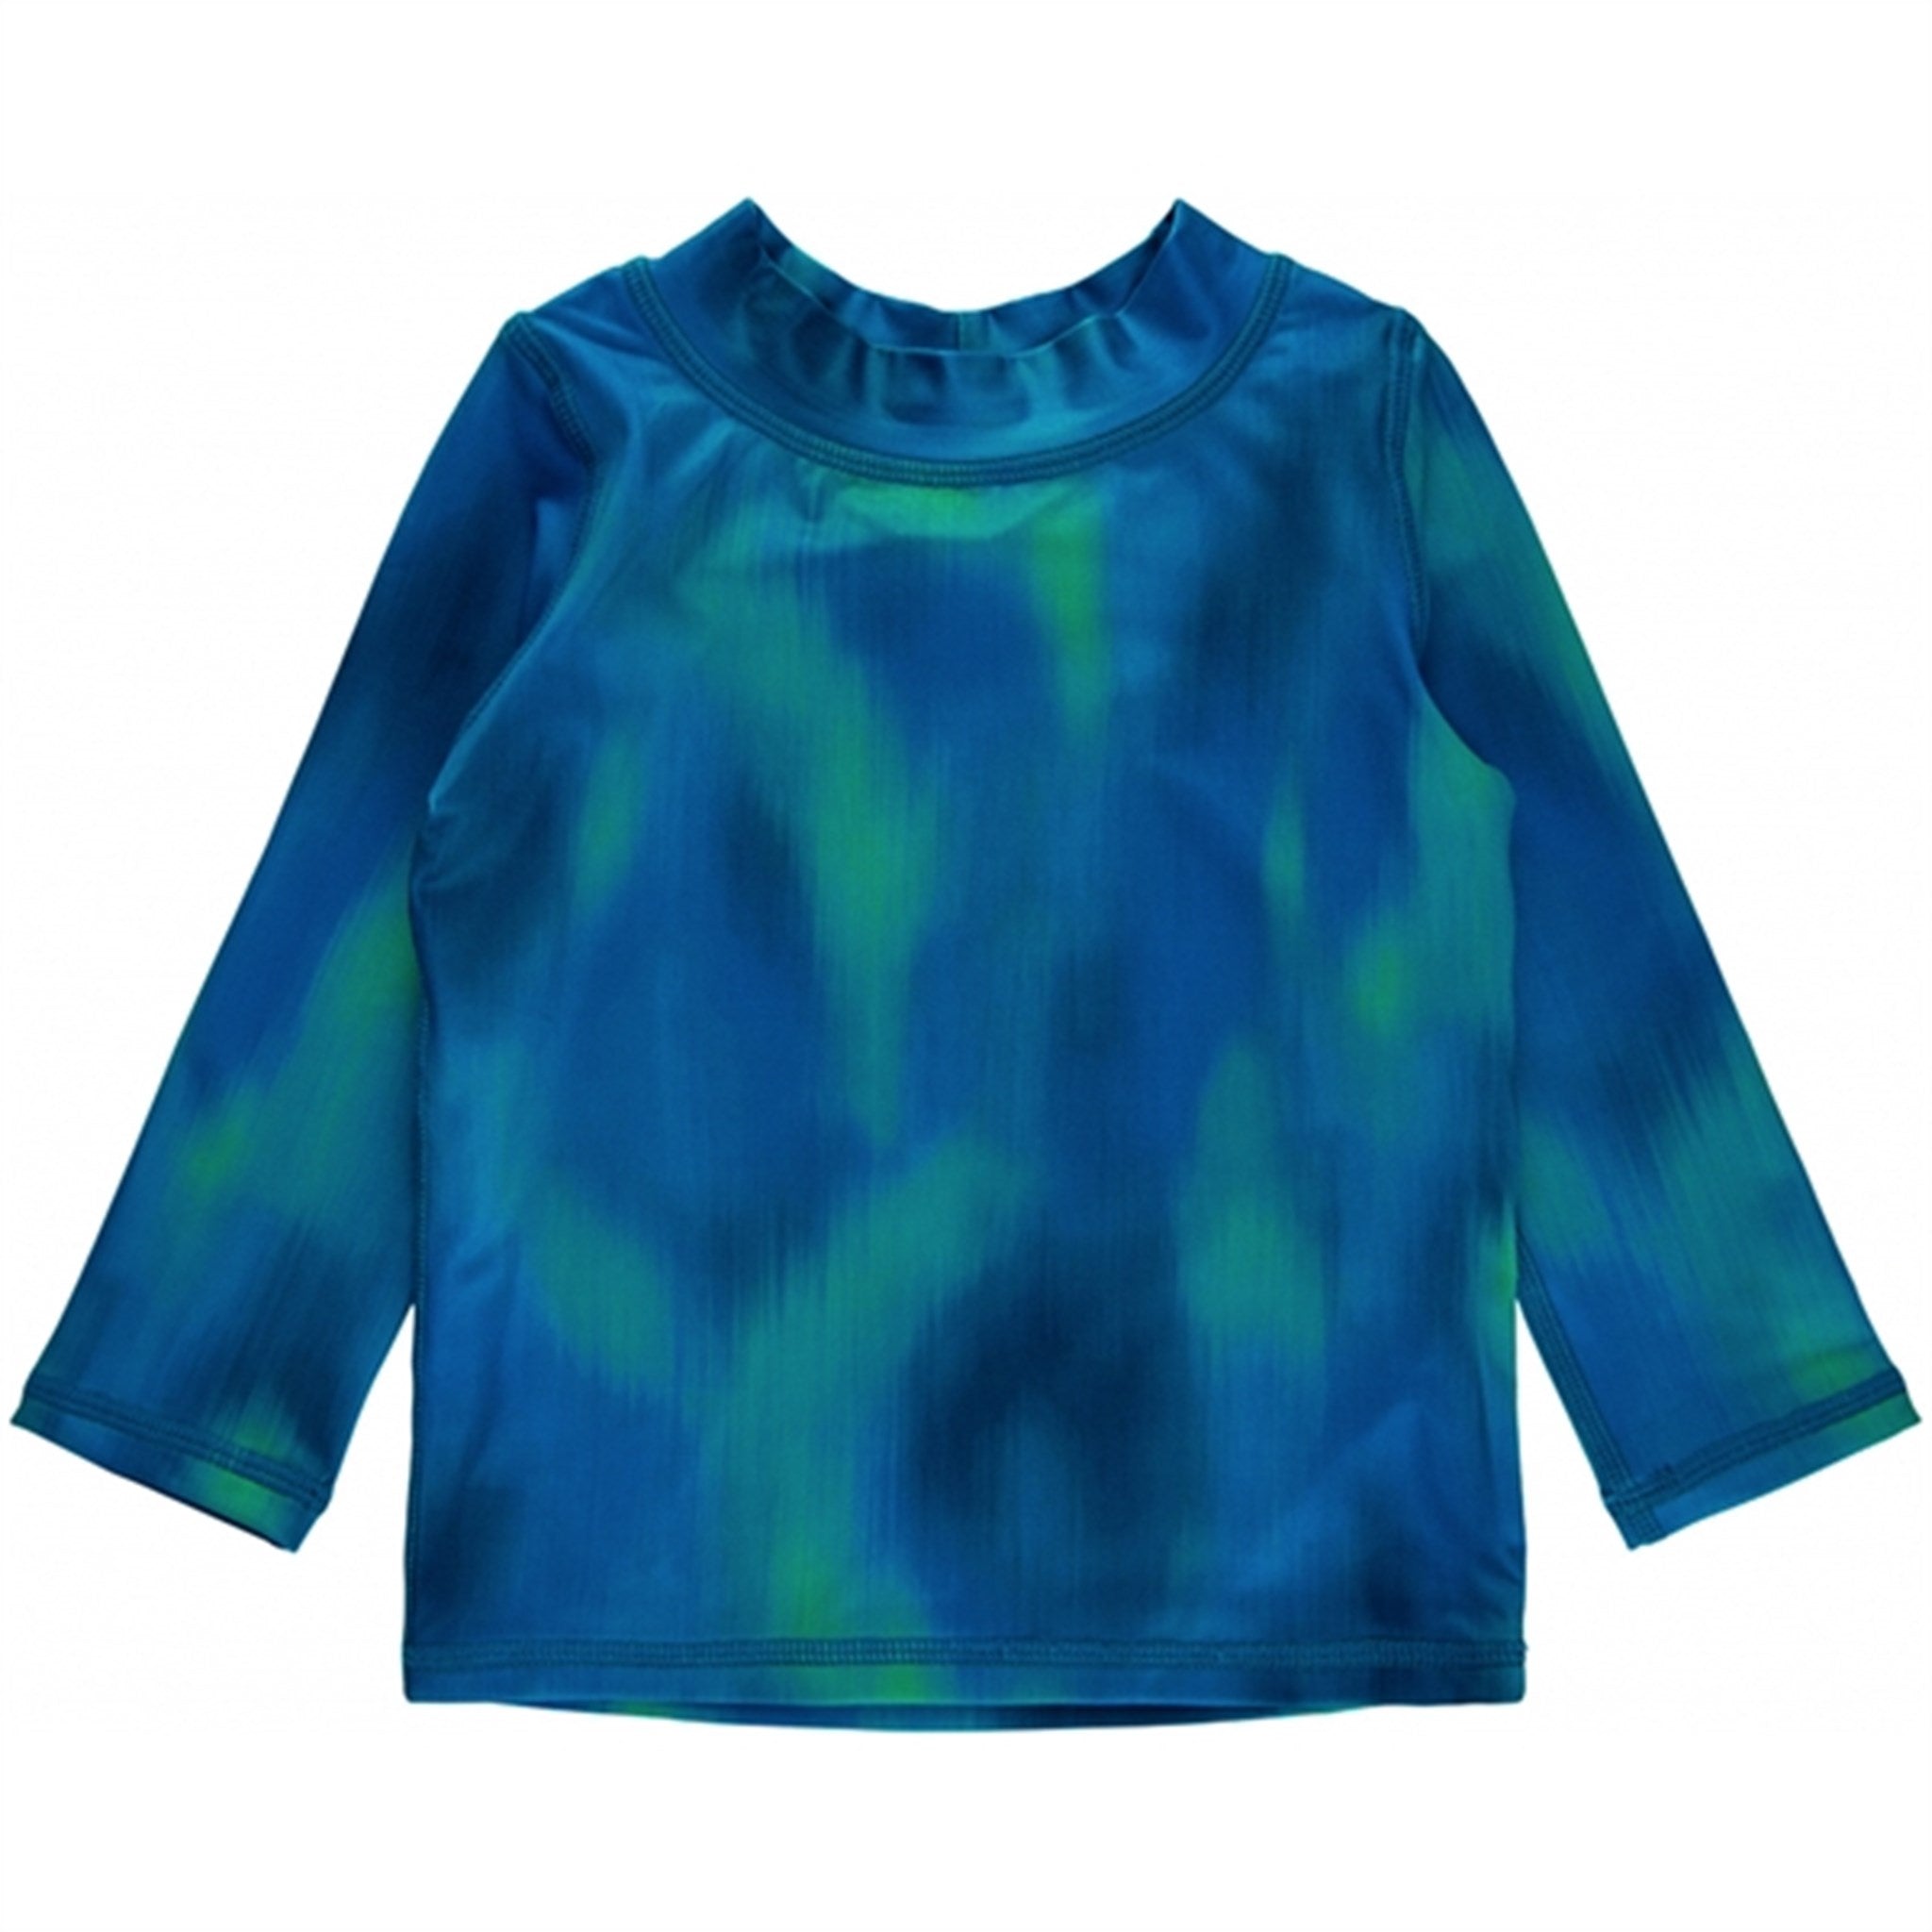 Soft Gallery Ocean Depths Baby Astin Reflections Blue Badebluse